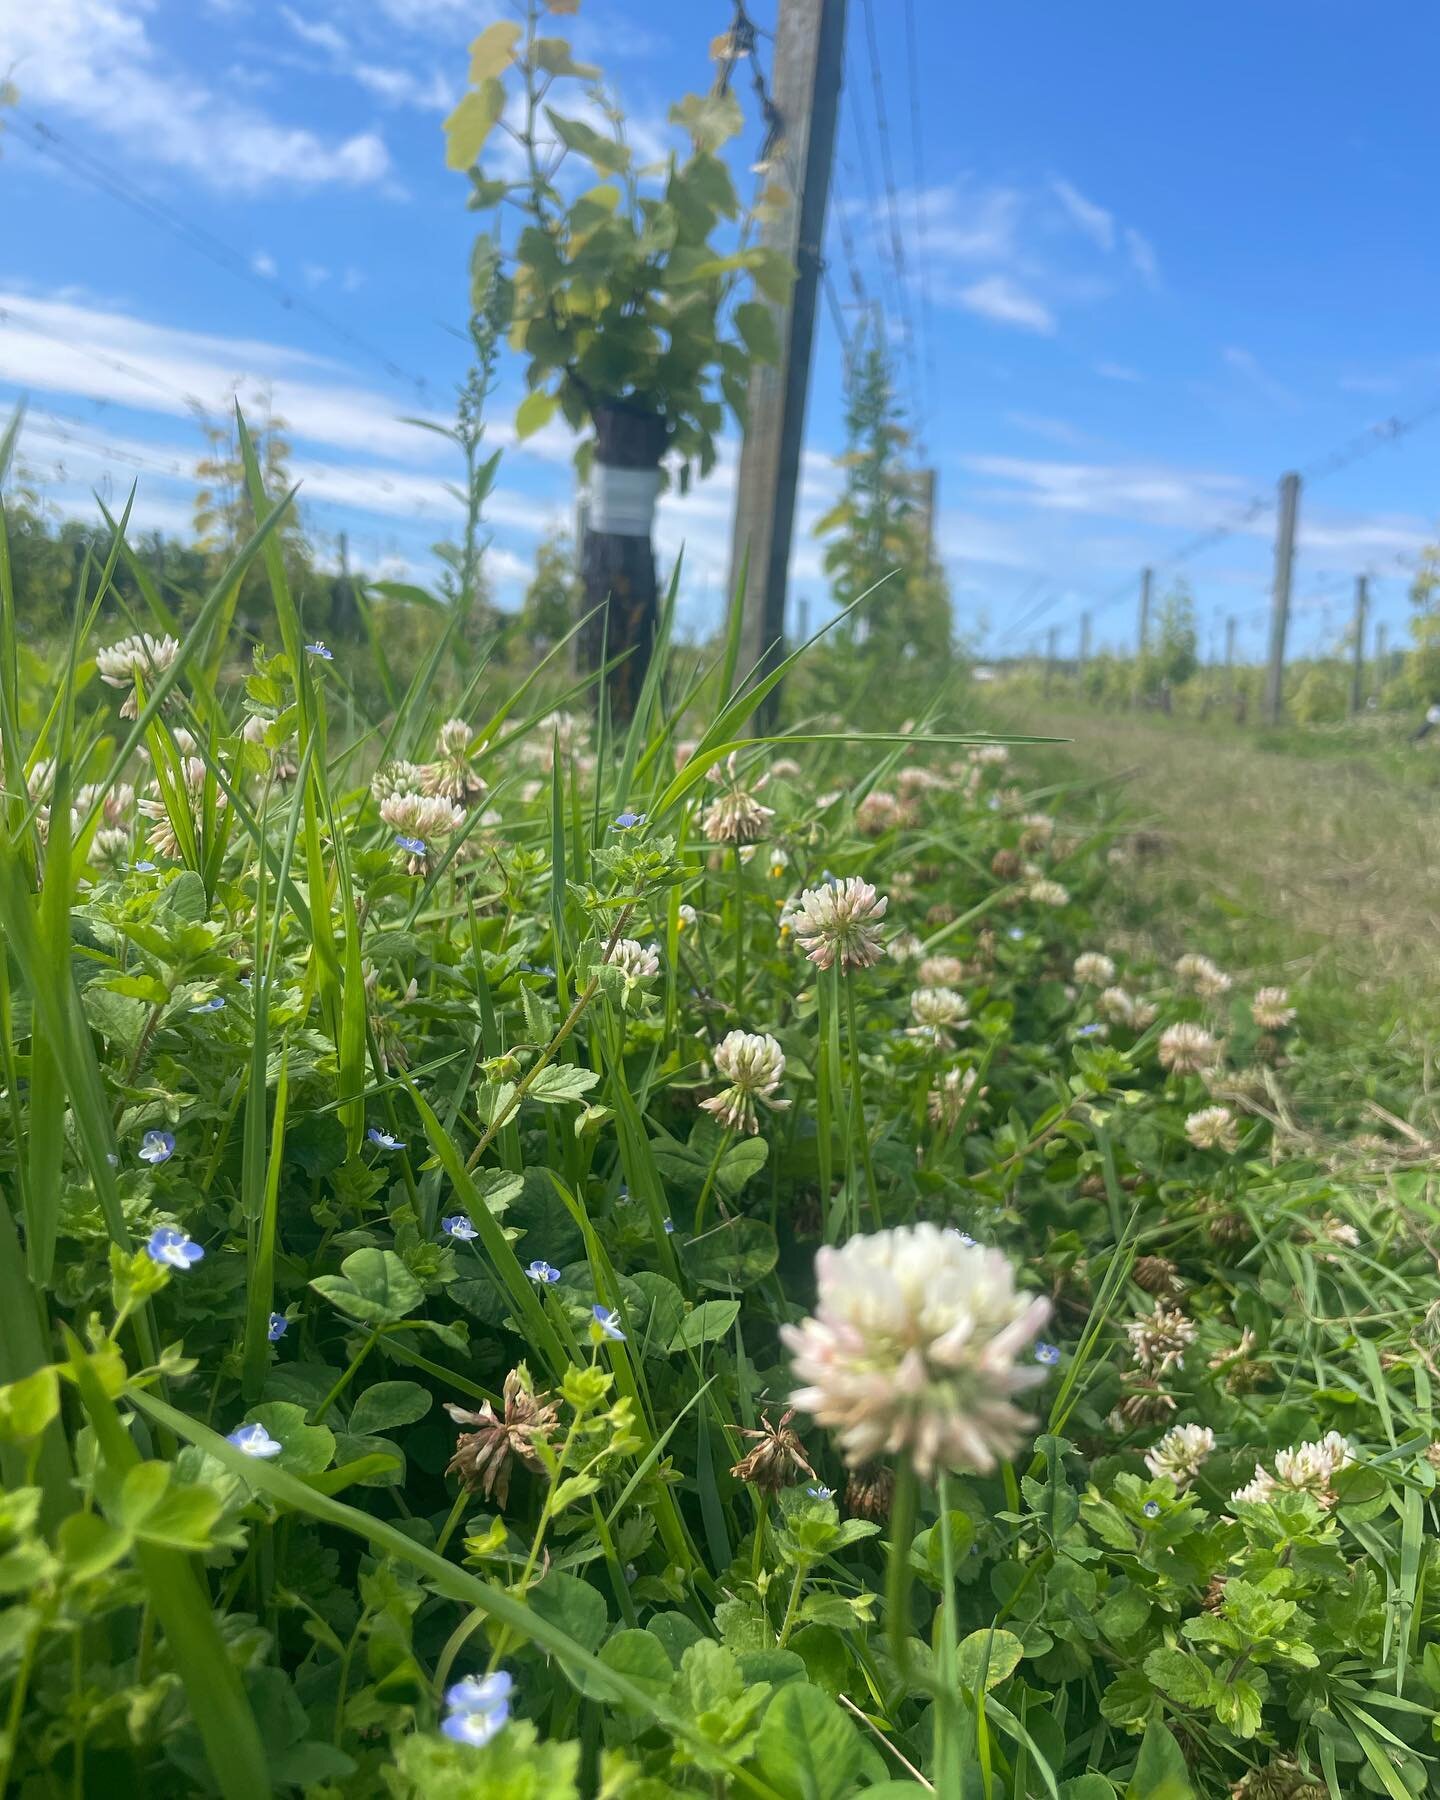 It&rsquo;s been a great season for white clover on the vineyard. 

Lots of beautiful white flowers attracting bees 🐝🐝

There&rsquo;s so many benefits of white clover under the vines. They provide an incredible amount of biomass that smothers weeds.